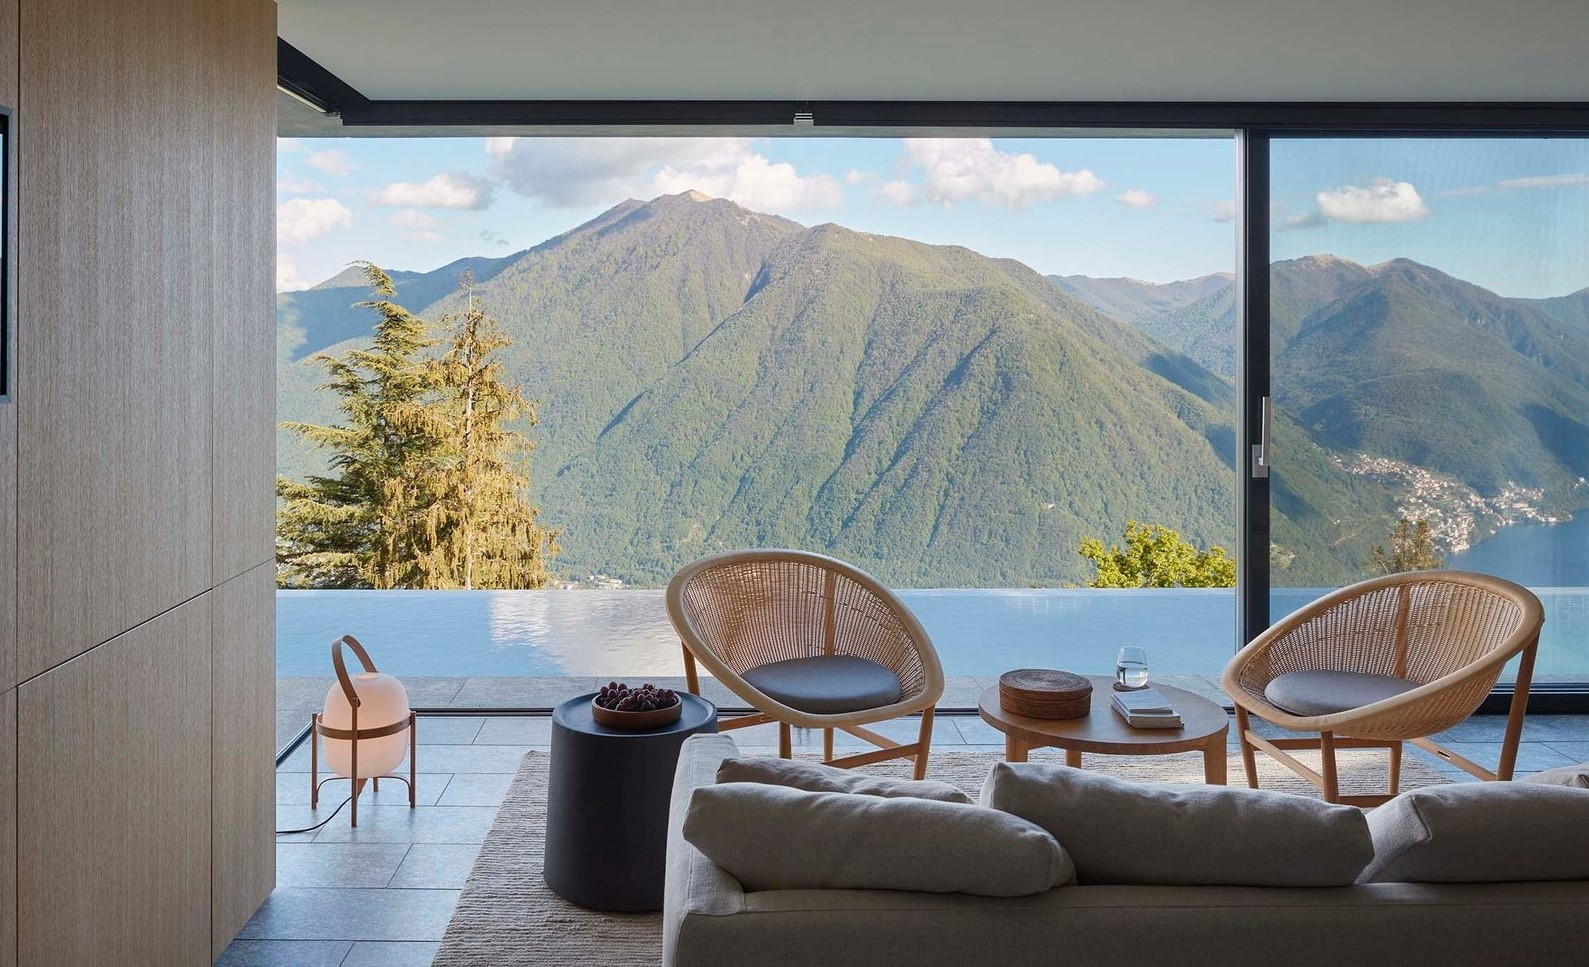 Top 10 Airbnbs with the best views in the world to stay in 2023